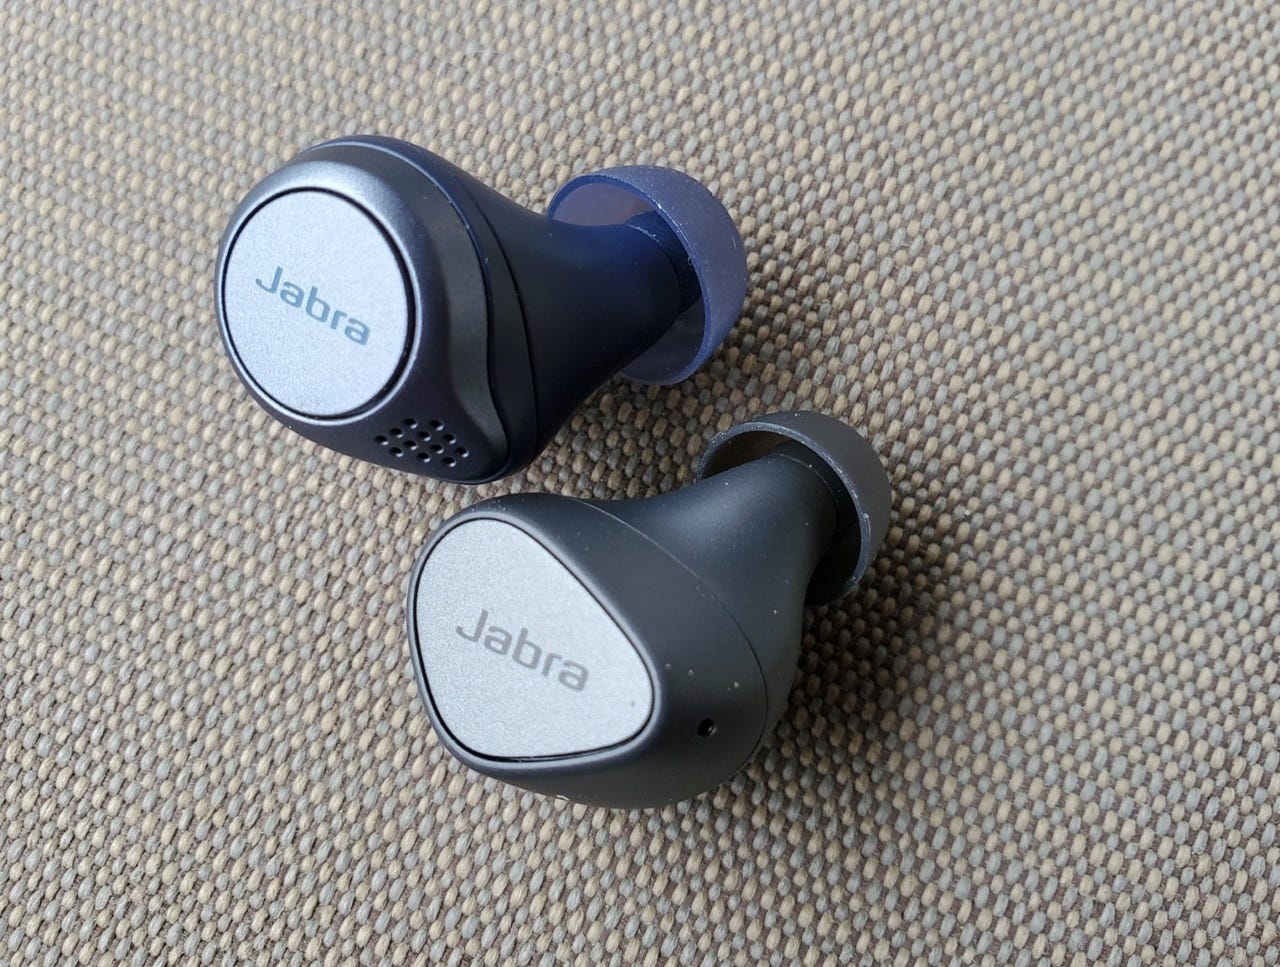 Jabra Elite 3 TWS earbuds review: Powerful performance, value-for-money  buds